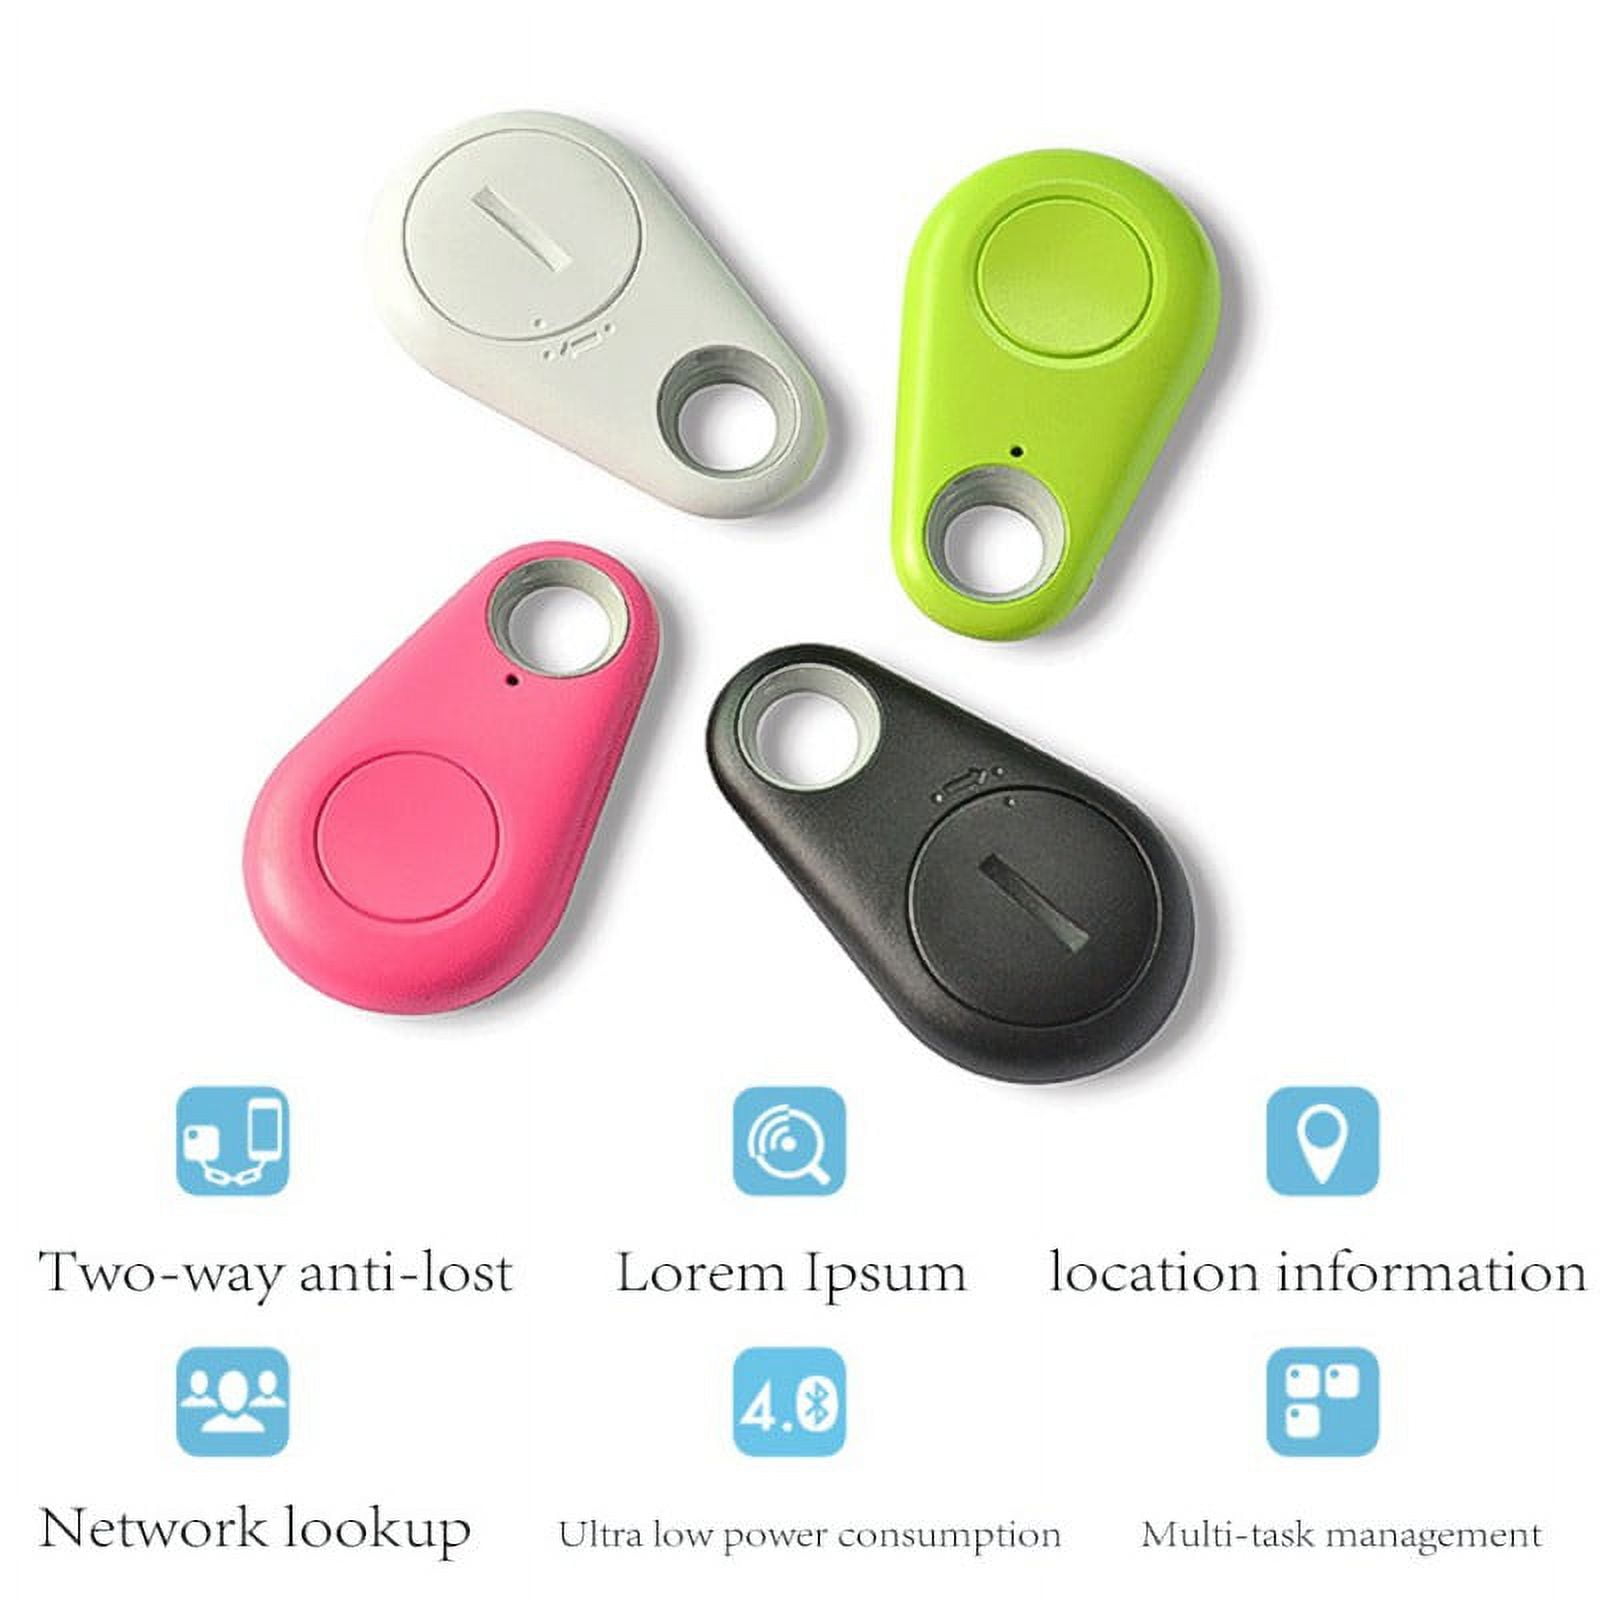 Micro Mini Smart Finder Bluetooth 4.0 GPS Locator Tracking Tag Alarm For  Wallet Tracker, Keys, Pets, And Kids/Senior Anti LOST Smart Tracer From  Sellerbest, $1.11